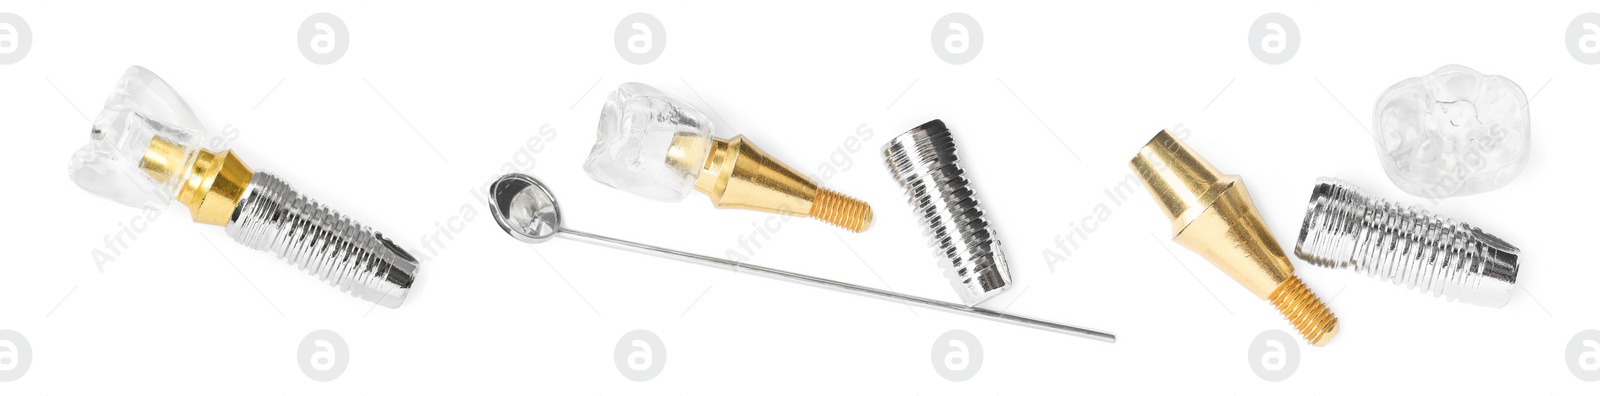 Image of Educational models of dental implants and medical tools on white background, collage. Banner design